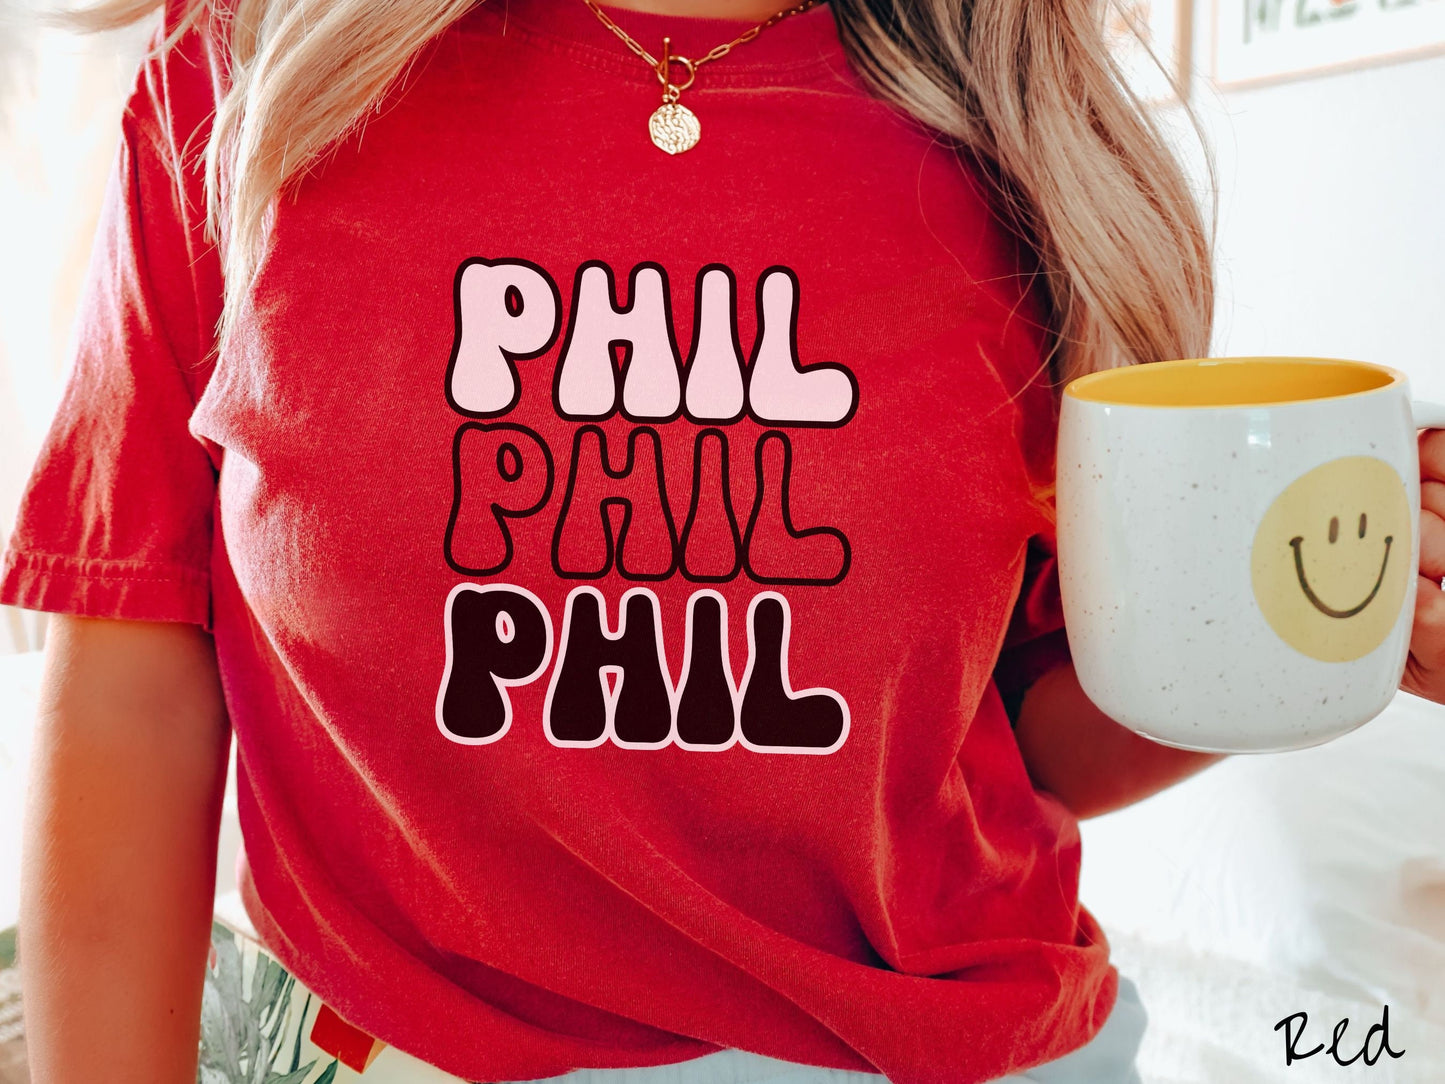 A woman wearing a cute red colored shirt with the text PHIL listed three times vertically in white, red, and black color text. The shirt is referring to the chant that occurs for the groundhog Phil every Groundhogs Day in Punxsutawney, PA.